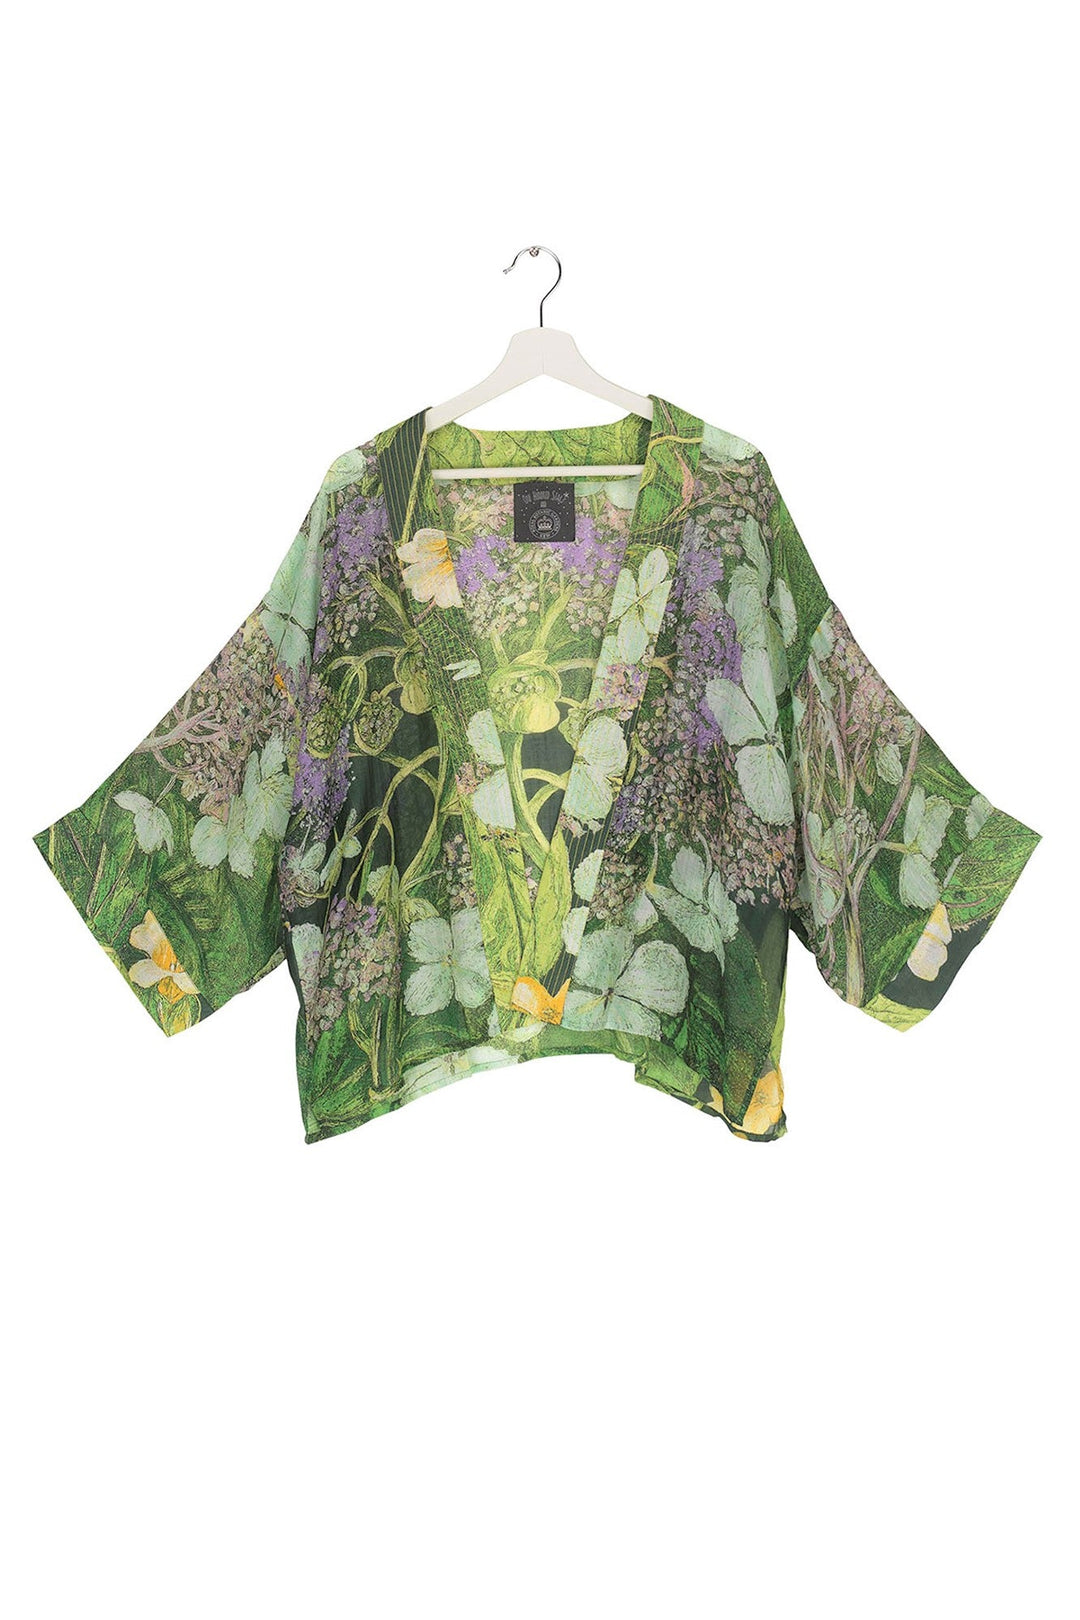 Marianne North Hydrangea Lime Green Kimono- Our bestselling kimono jackets have loose ¾ length sleeves, an open front and a lightly embroidered lapel. Pair with a matching camisole and your favourite jeans in summer or layer over a polo neck during the cooler months.